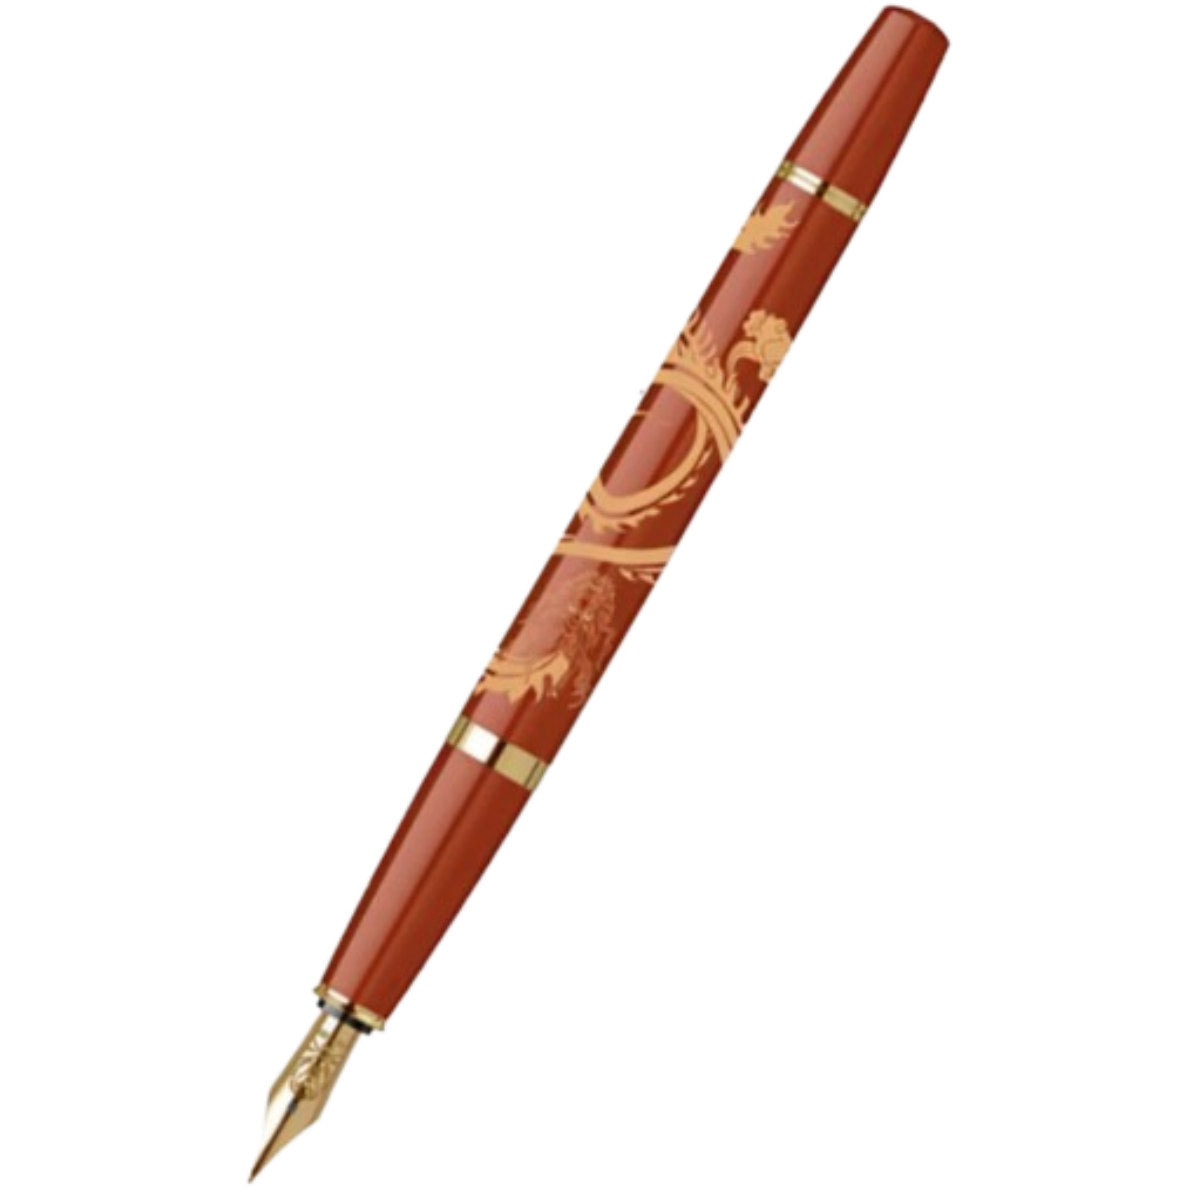 Cross Bailey Light - Year of the Dragon - Fountain Pen - Polished